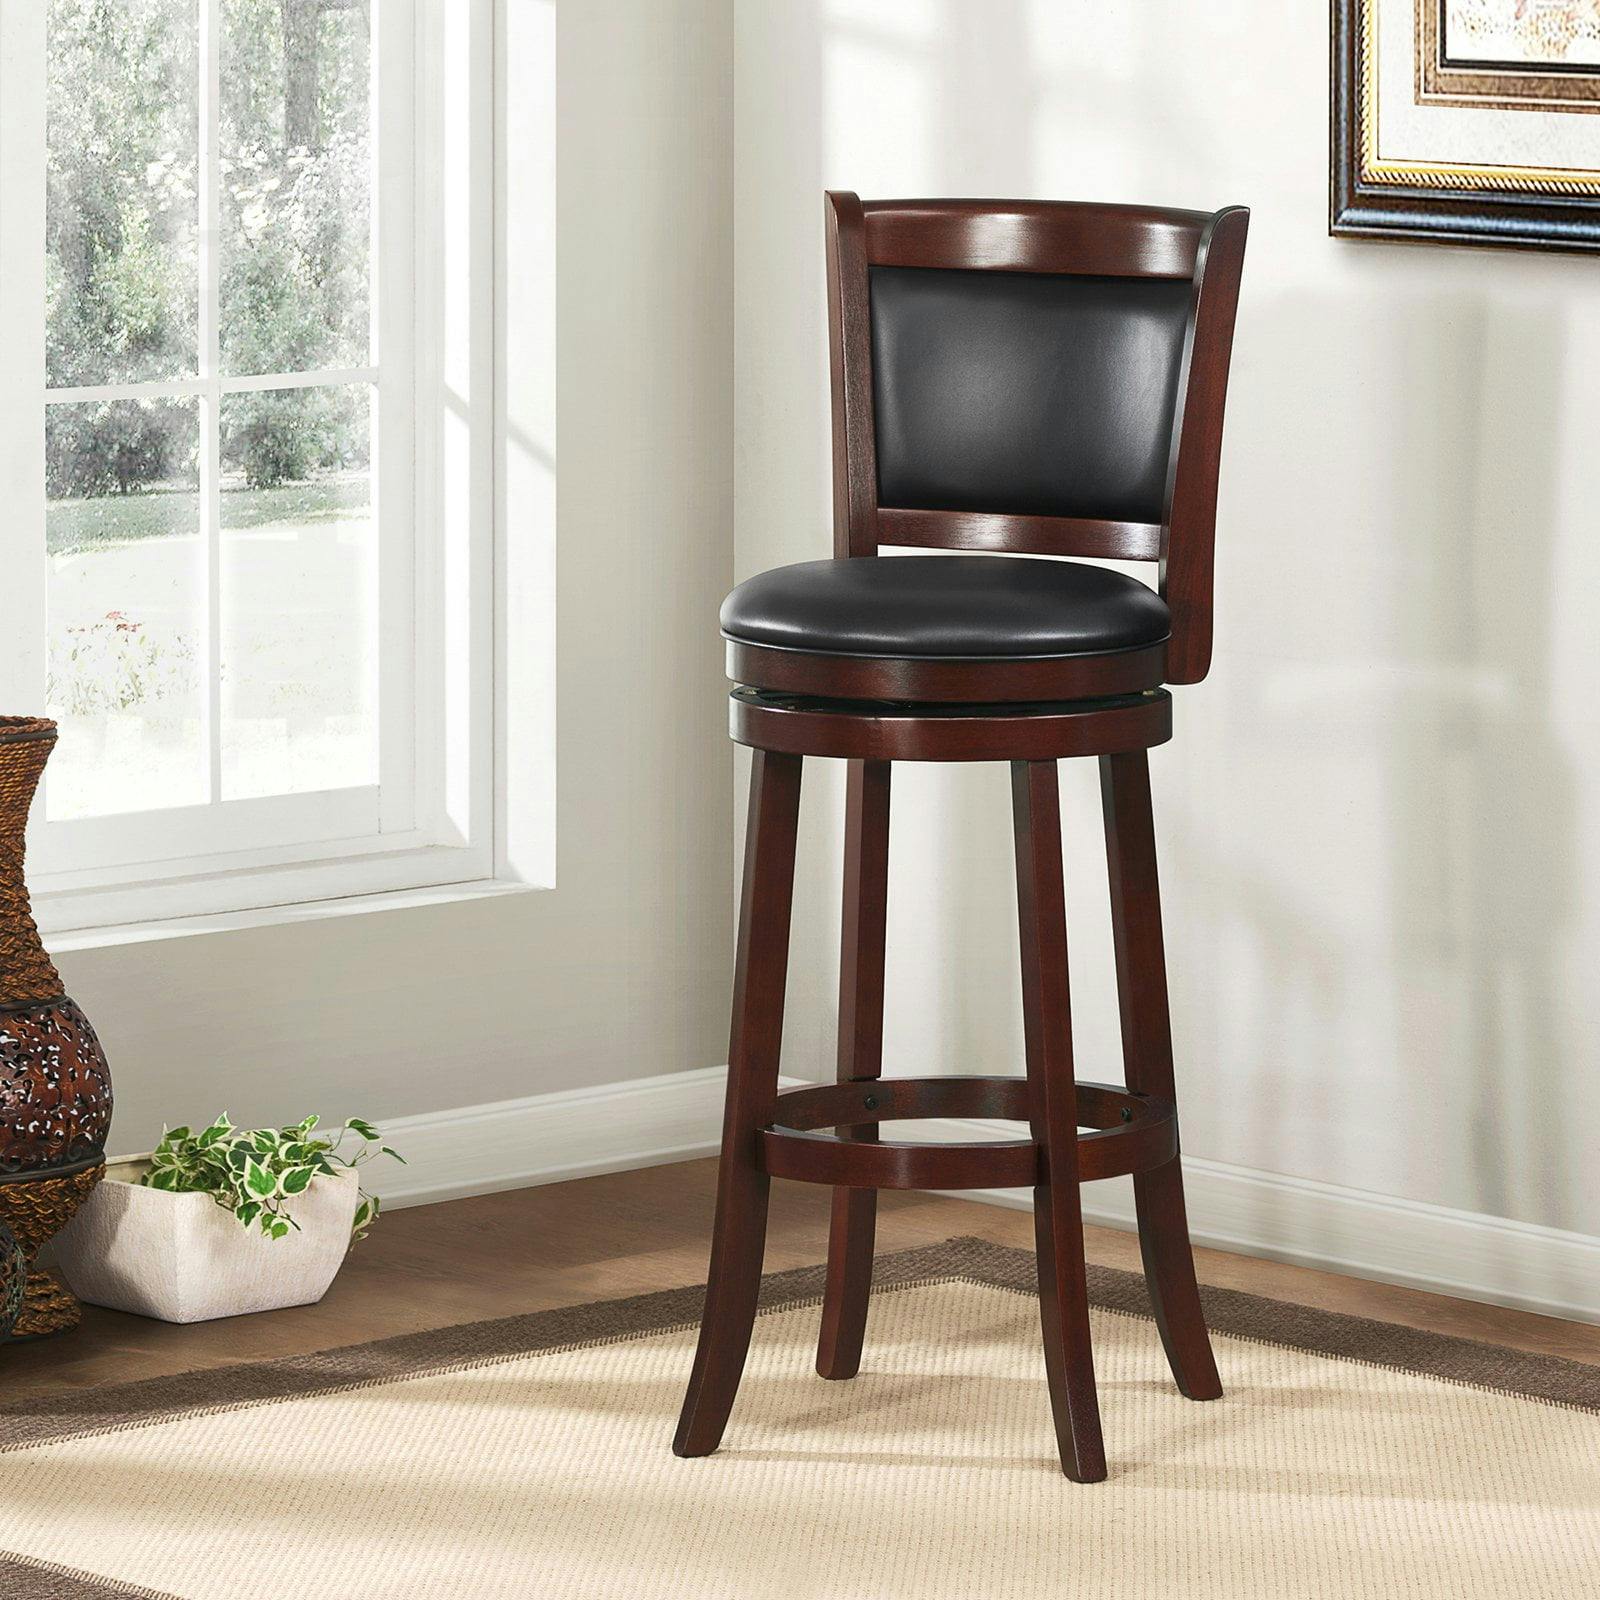 Traditional Cherry Wood and Black Faux Leather Swivel Pub Stool